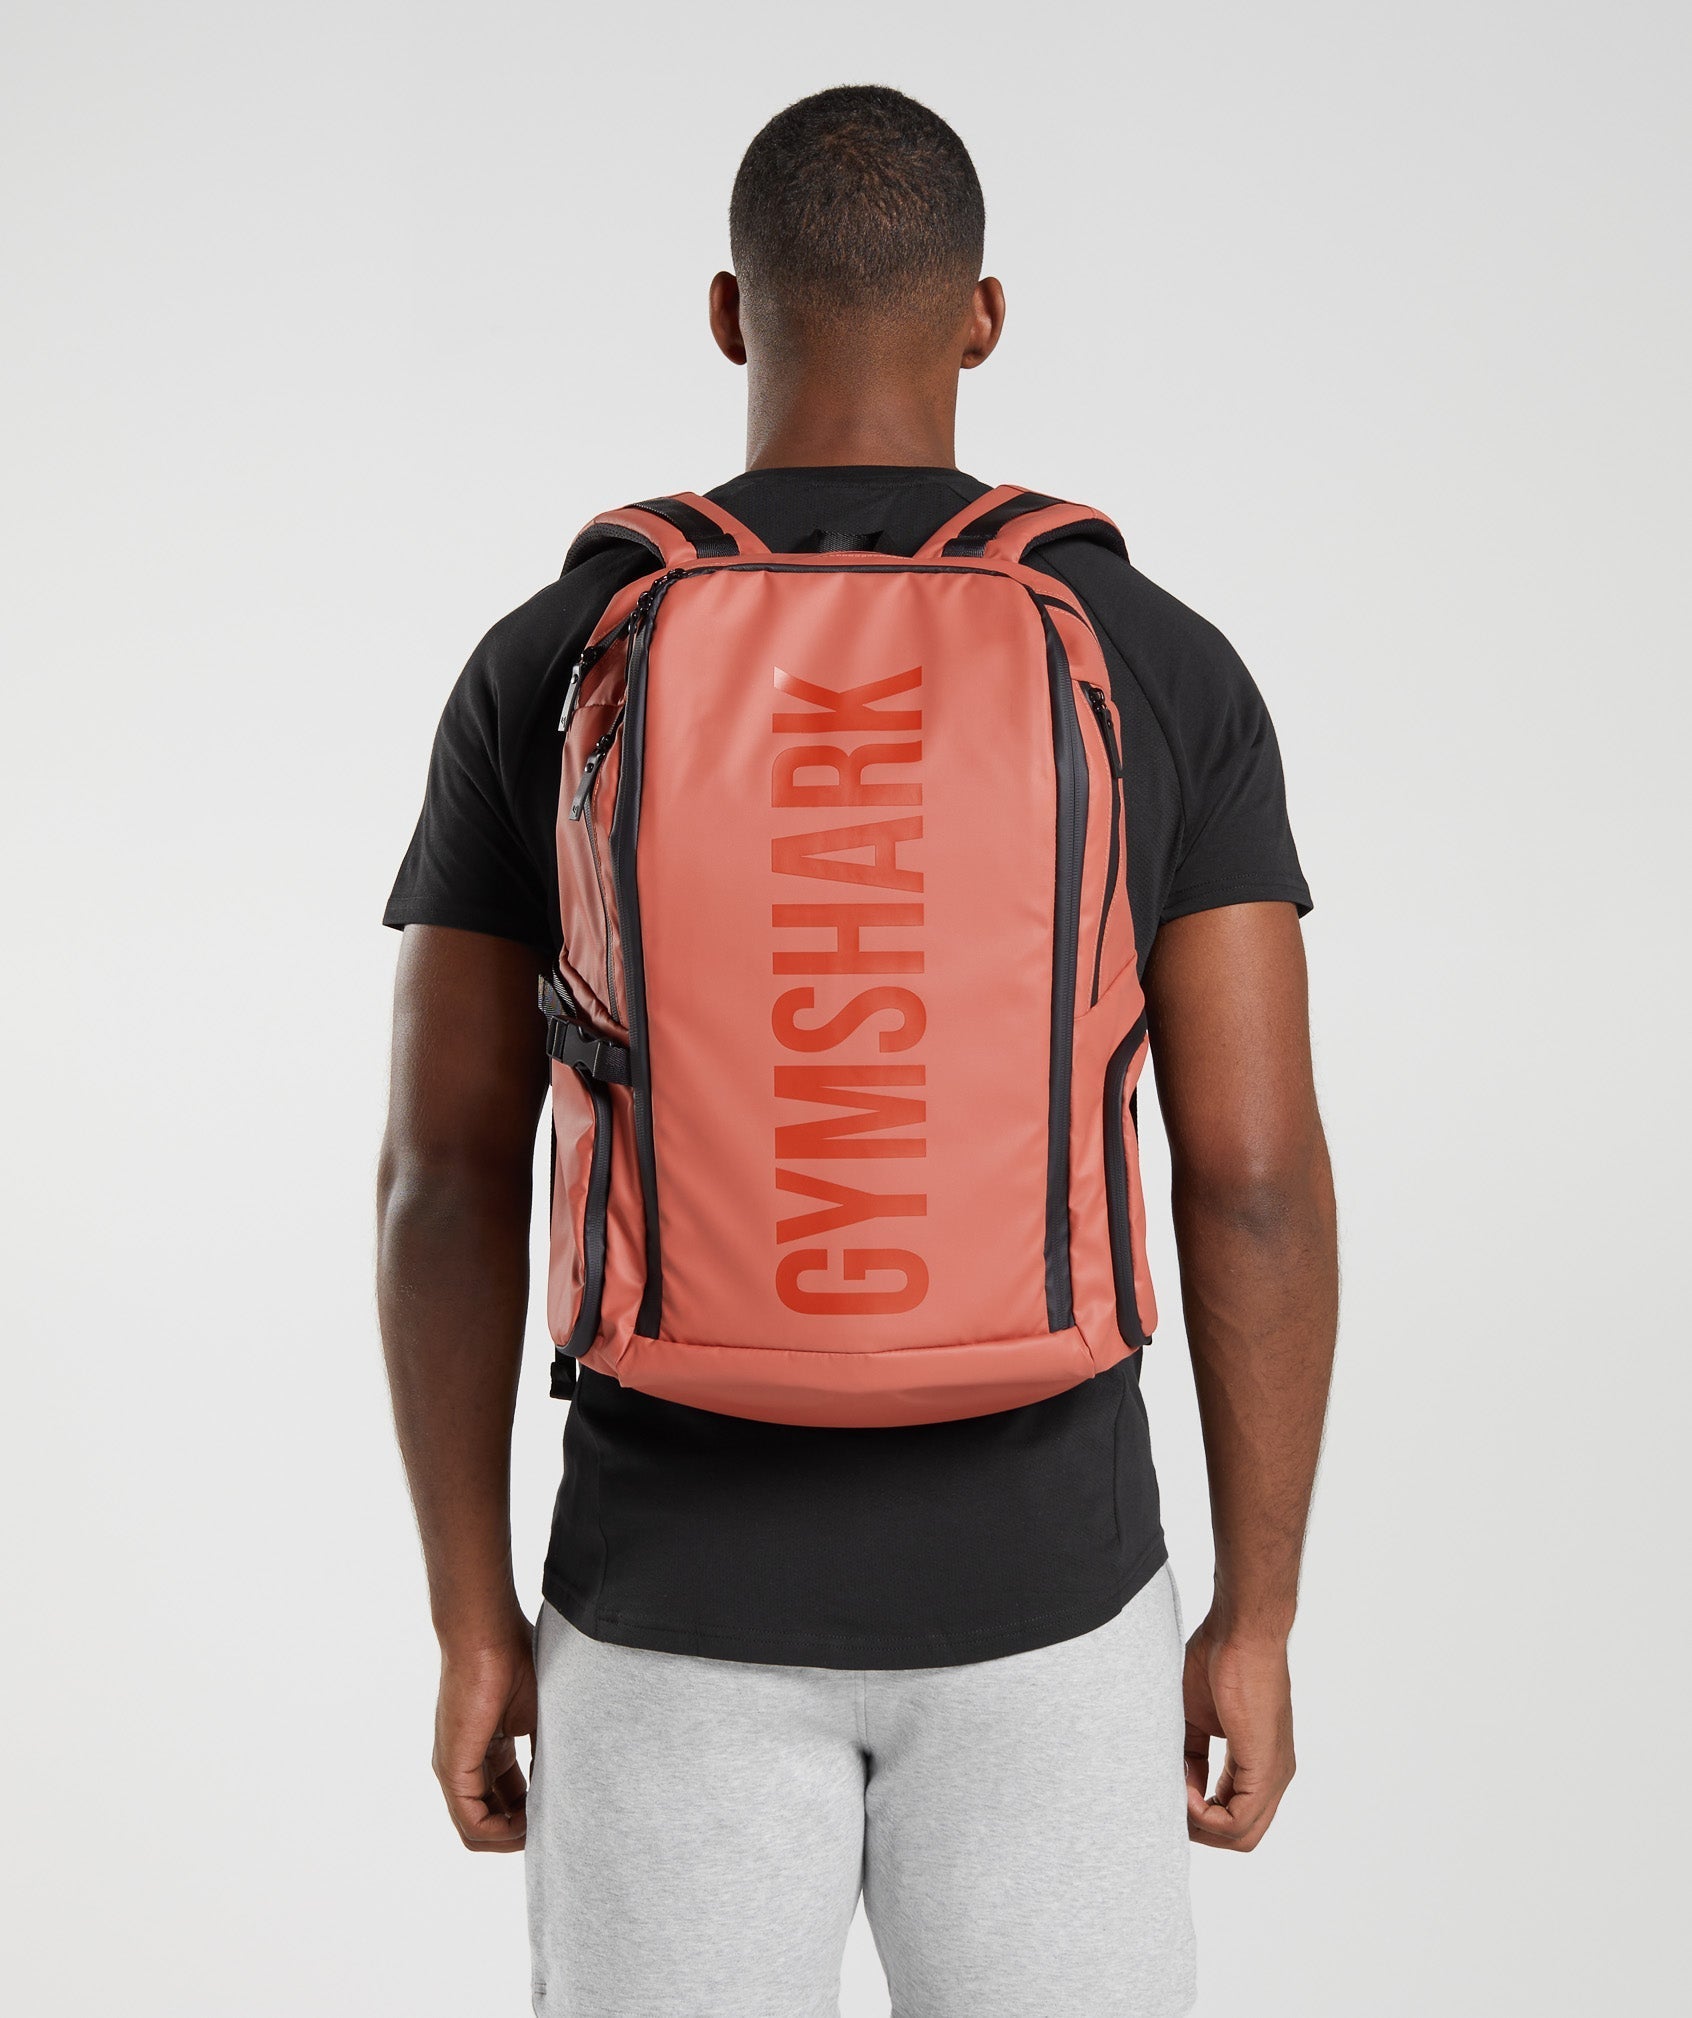 X-Series 0.3 Backpack in Persimmon Red - view 3